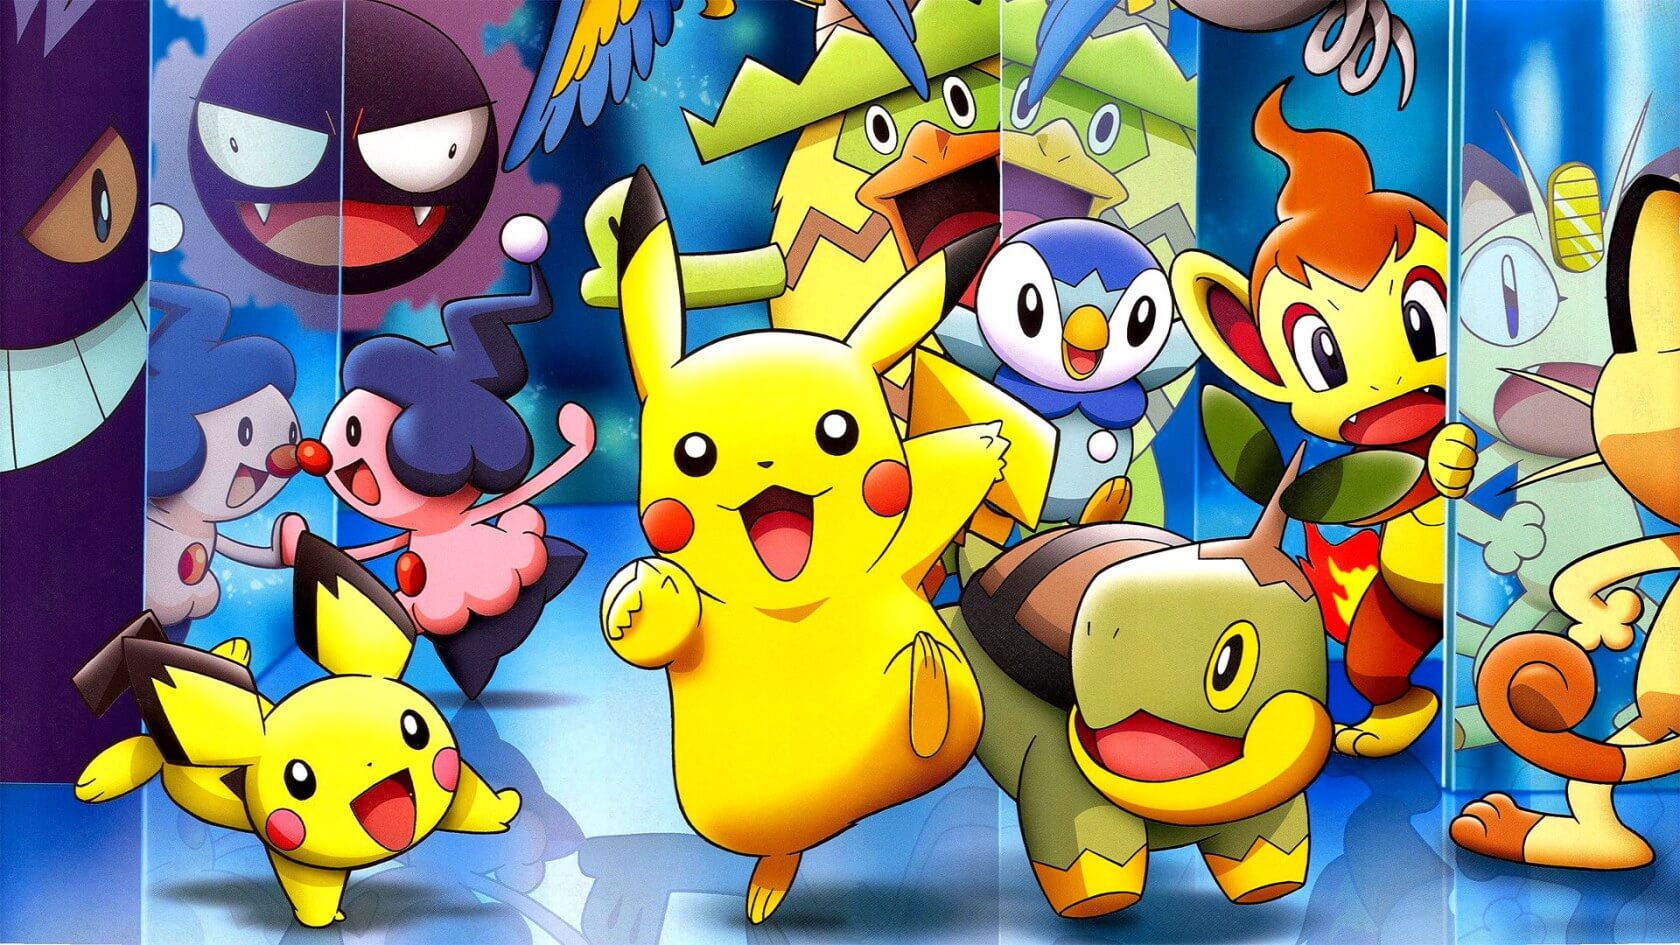 Pokemon fans may have developed a brain region dedicated to recognizing the virtual creatures